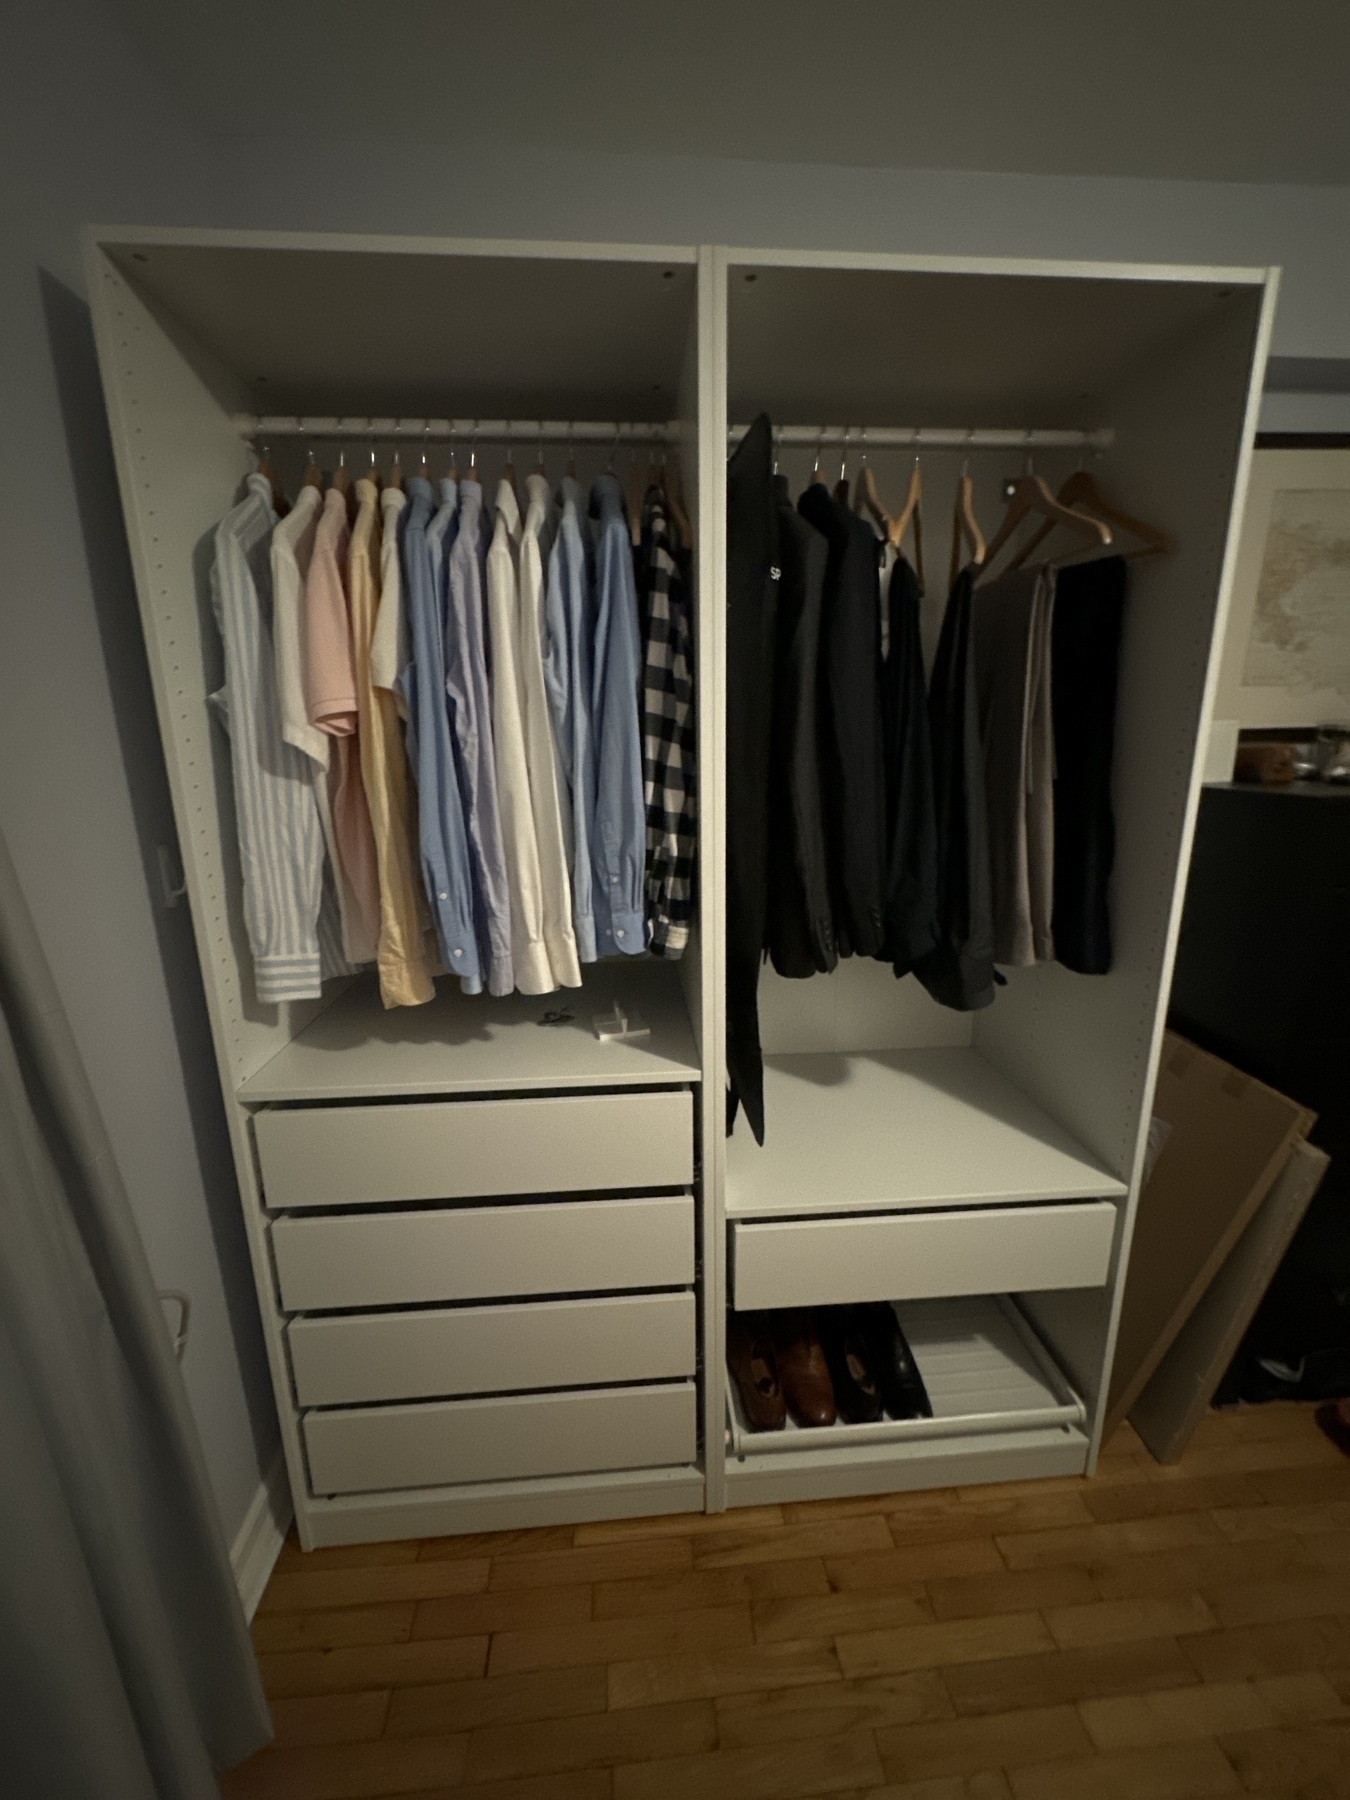 Image of an open IKEA Pax wardrobe. The left section displays an array of neatly hung shirts in pastel shades of pink, blue, and white. The right section contains darker clothing, including charcoal and navy suits and pants. Below the hanging clothes on the left is a set of white drawers, on the right is a shelf with two pairs of shoes neatly arranged.